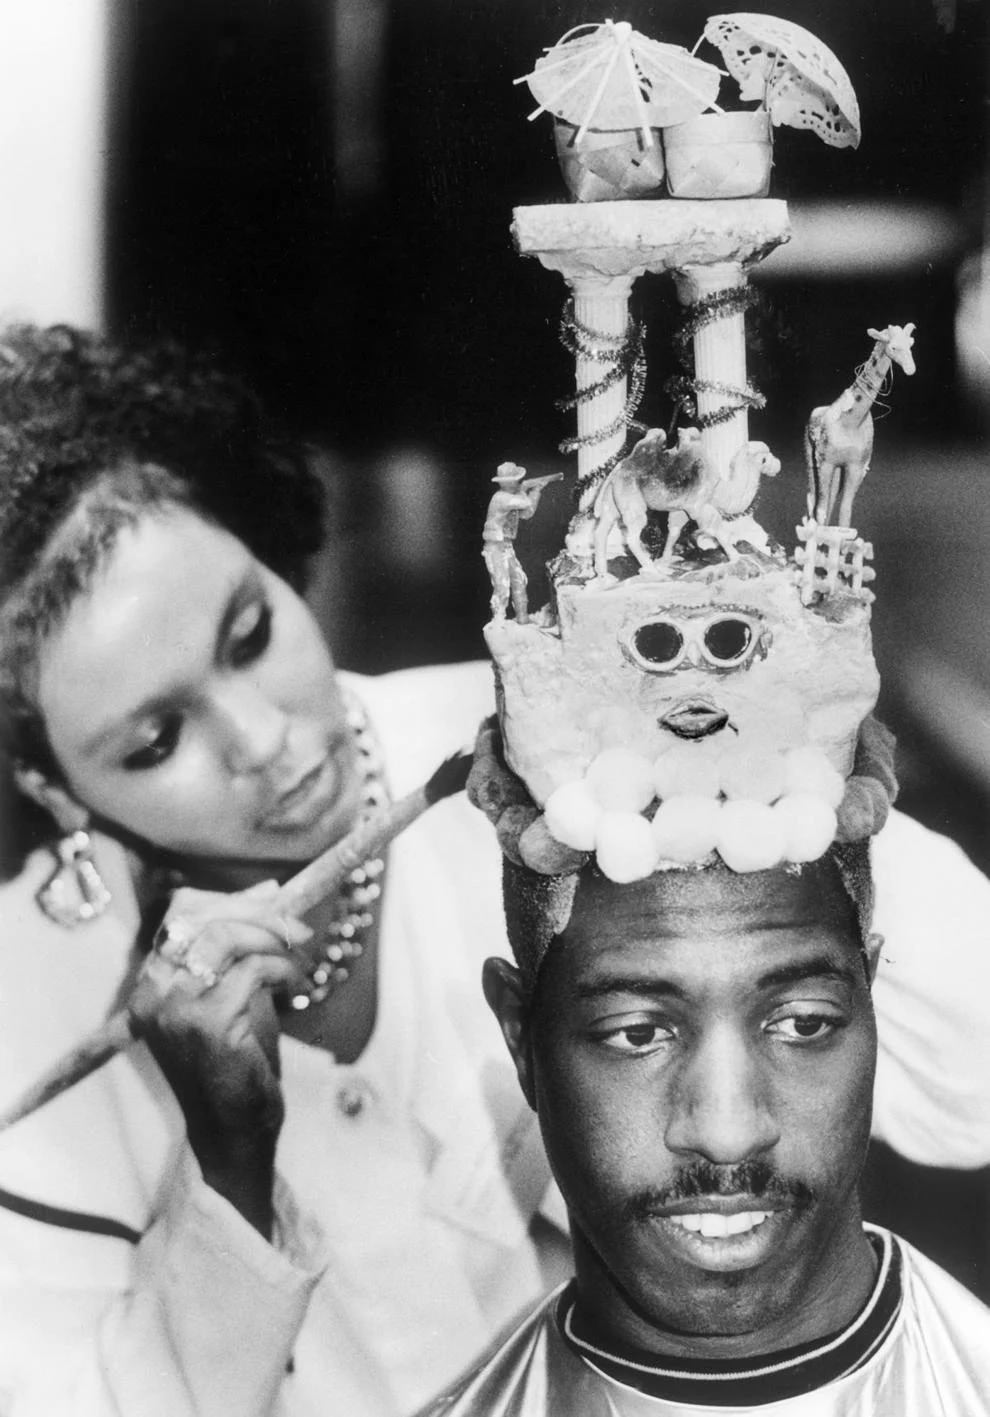 Kevin Cherry got an eye-catching look from Richmond hair stylist Shelira Morrison, who said the sculpture – columns, beasts, parasols and more – sprung to her imagination, 1991